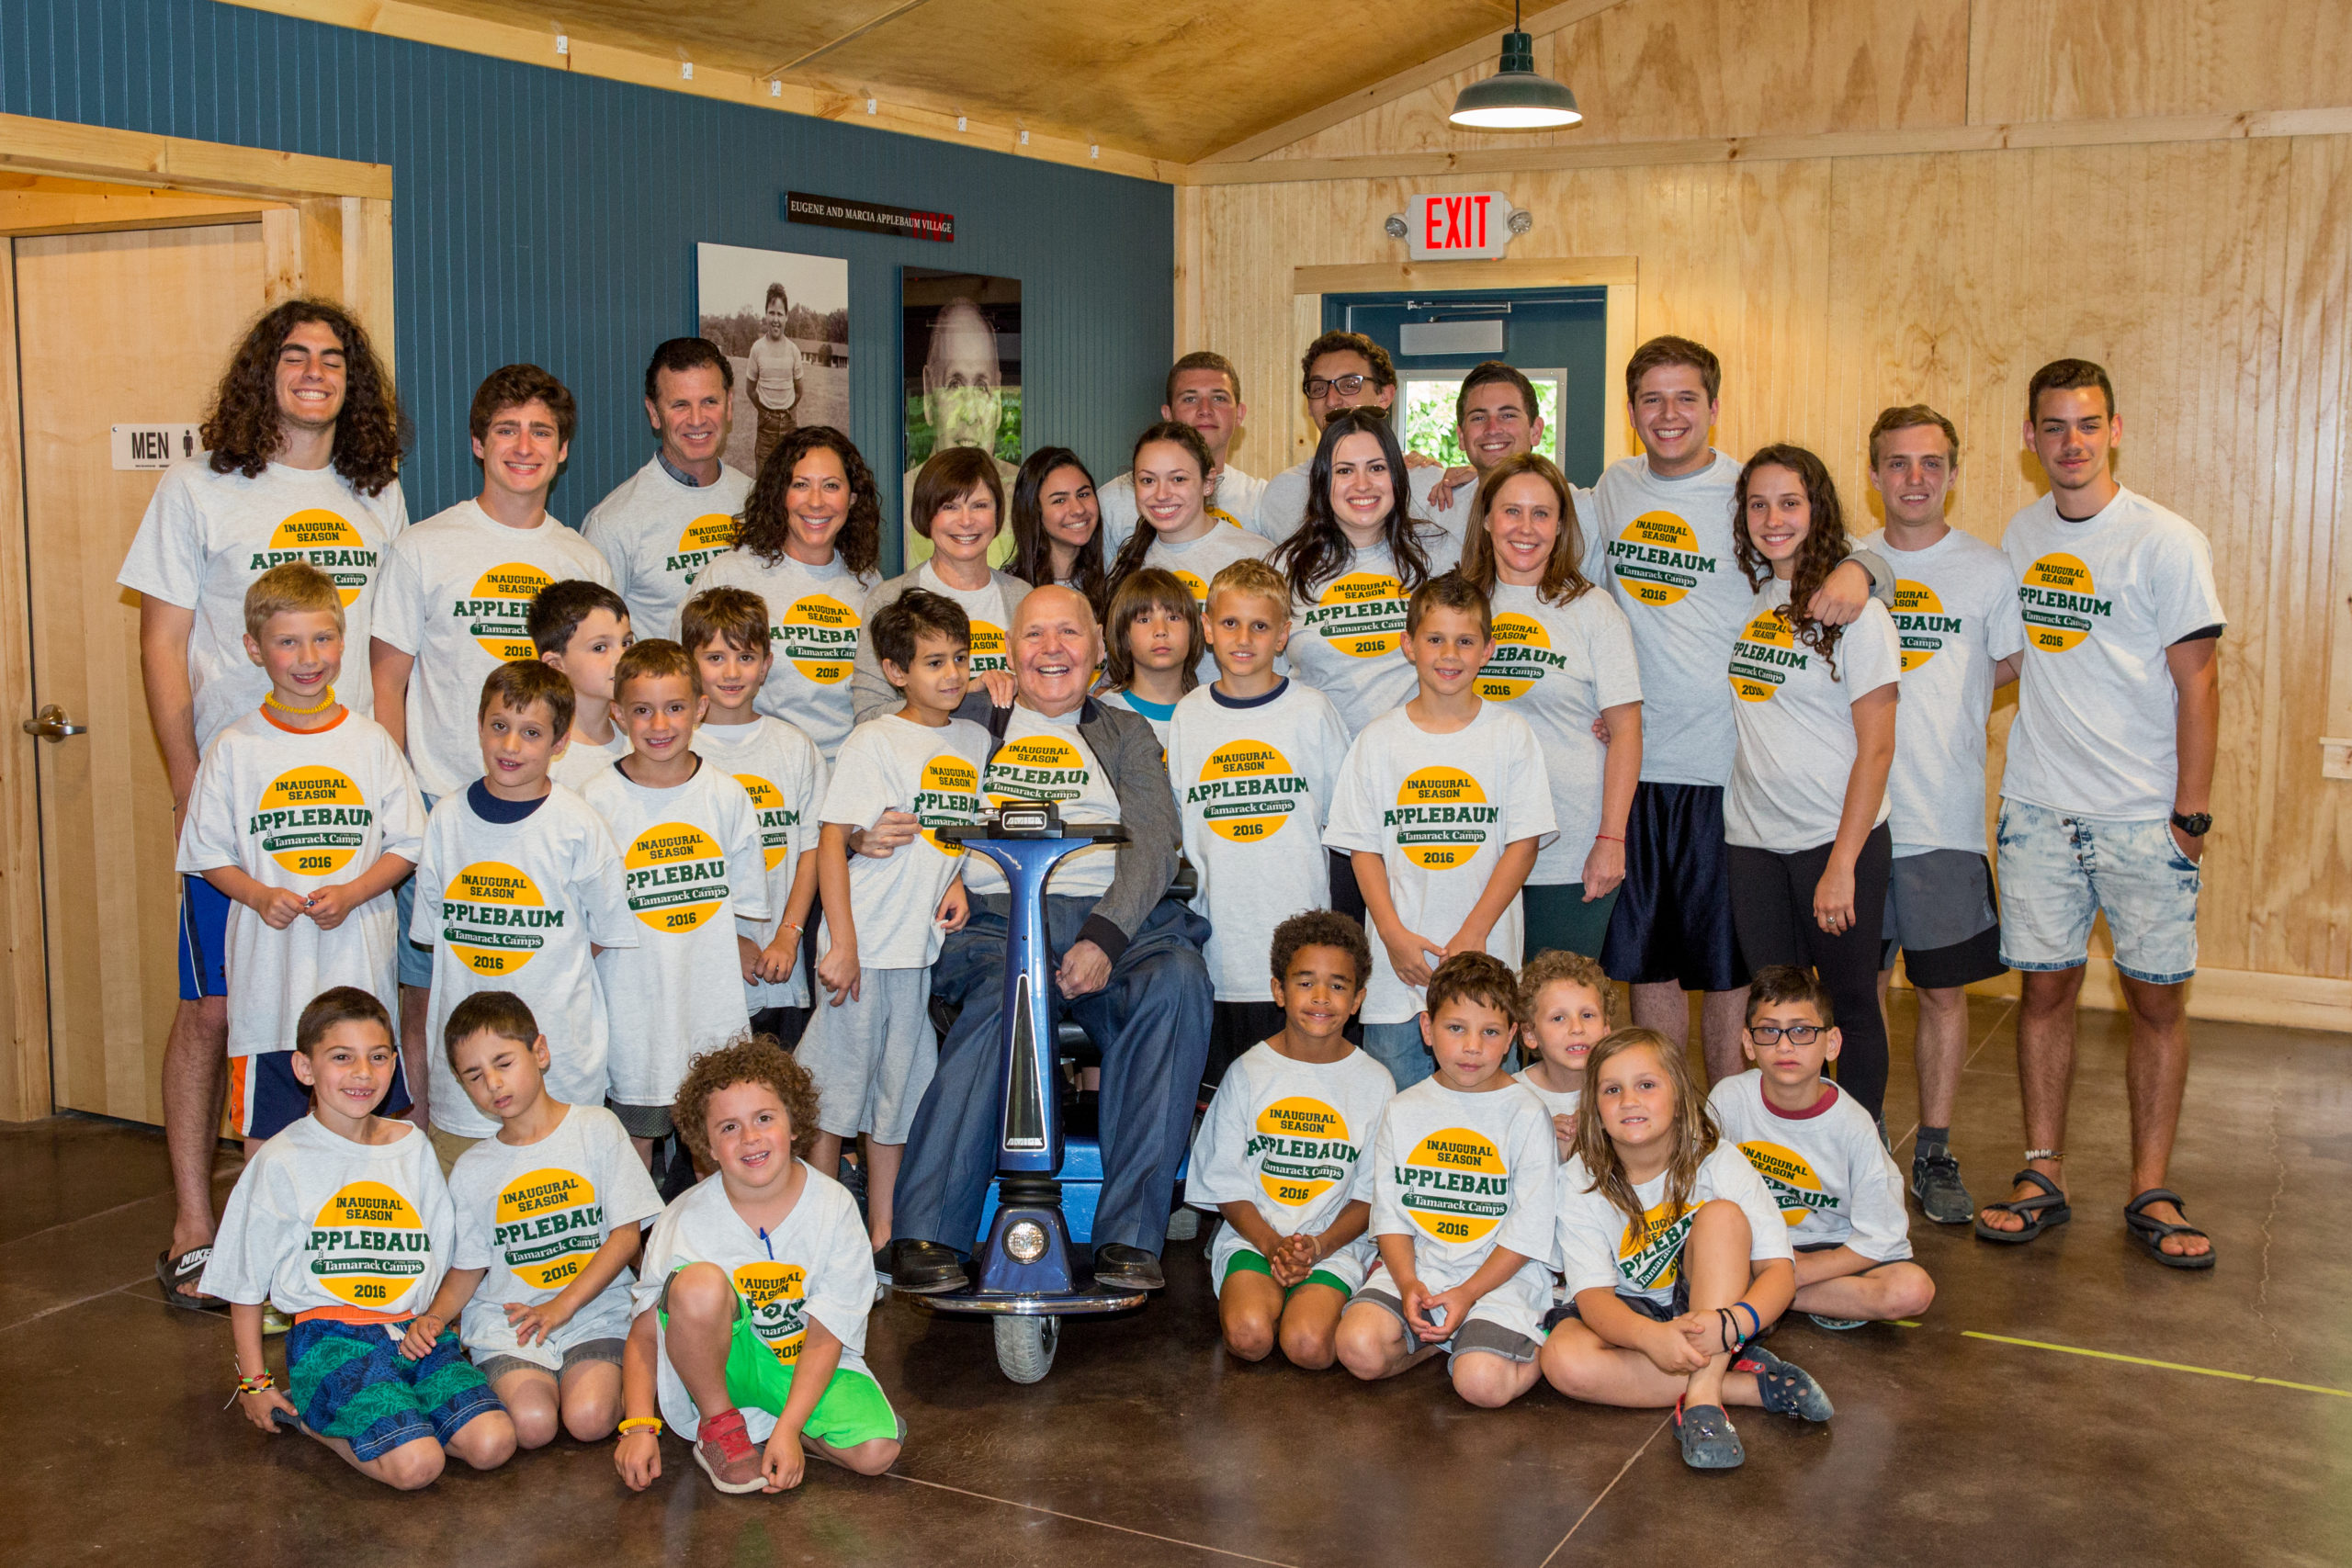 Group gathers with campers at the Eugene Applebaum Dedication at Tamarack Camps, 2016